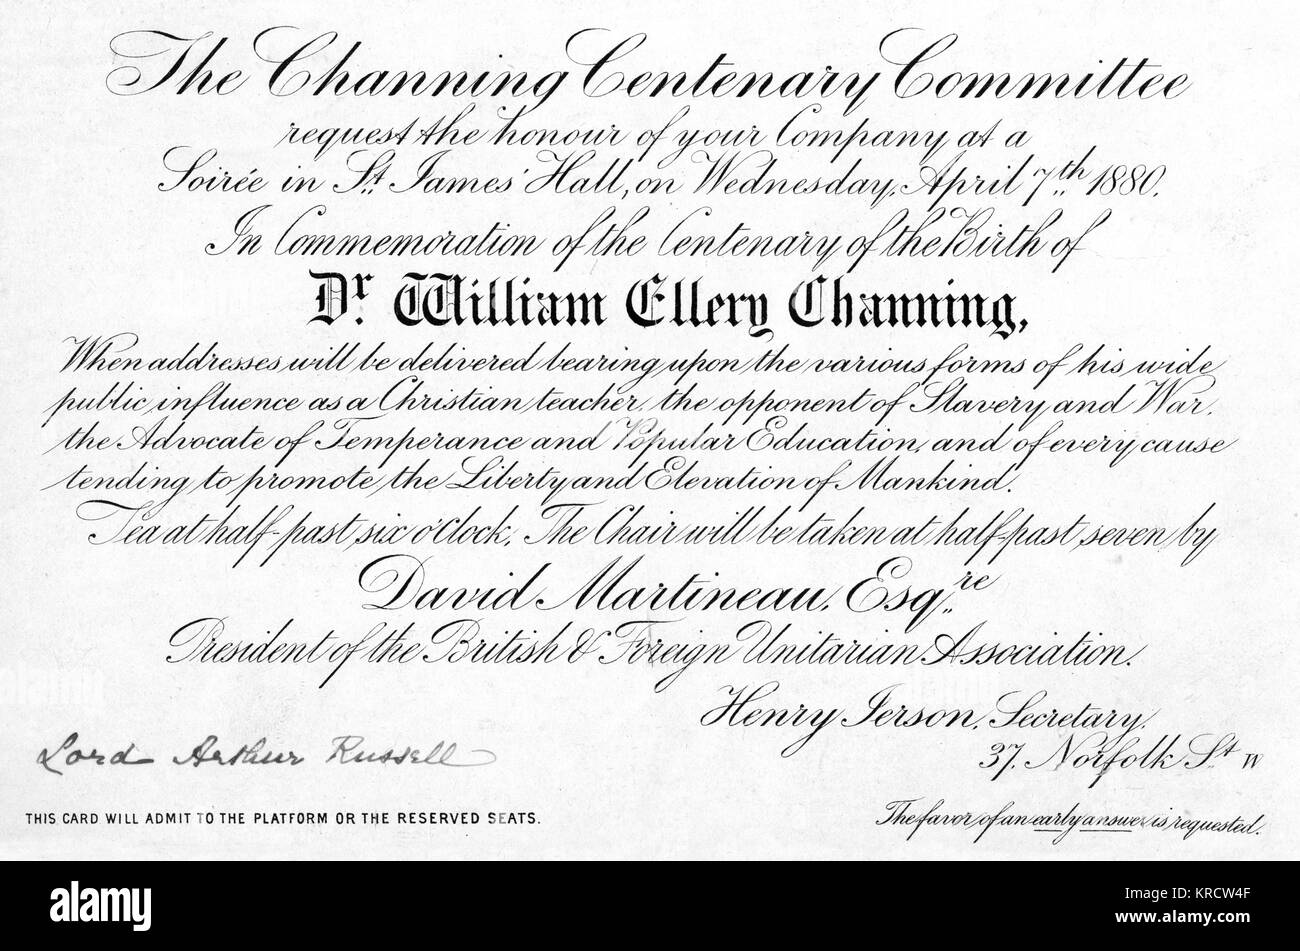 WILLIAM ELLERY CHANNING (1780-1842), American Unitarian minister and campaigner against slavery -- an invitation to a centenary soiree at St James's Hall, London, from the Channing Centenary Committee, made out to Lord Arthur Russell. Date: 1880 Stock Photo